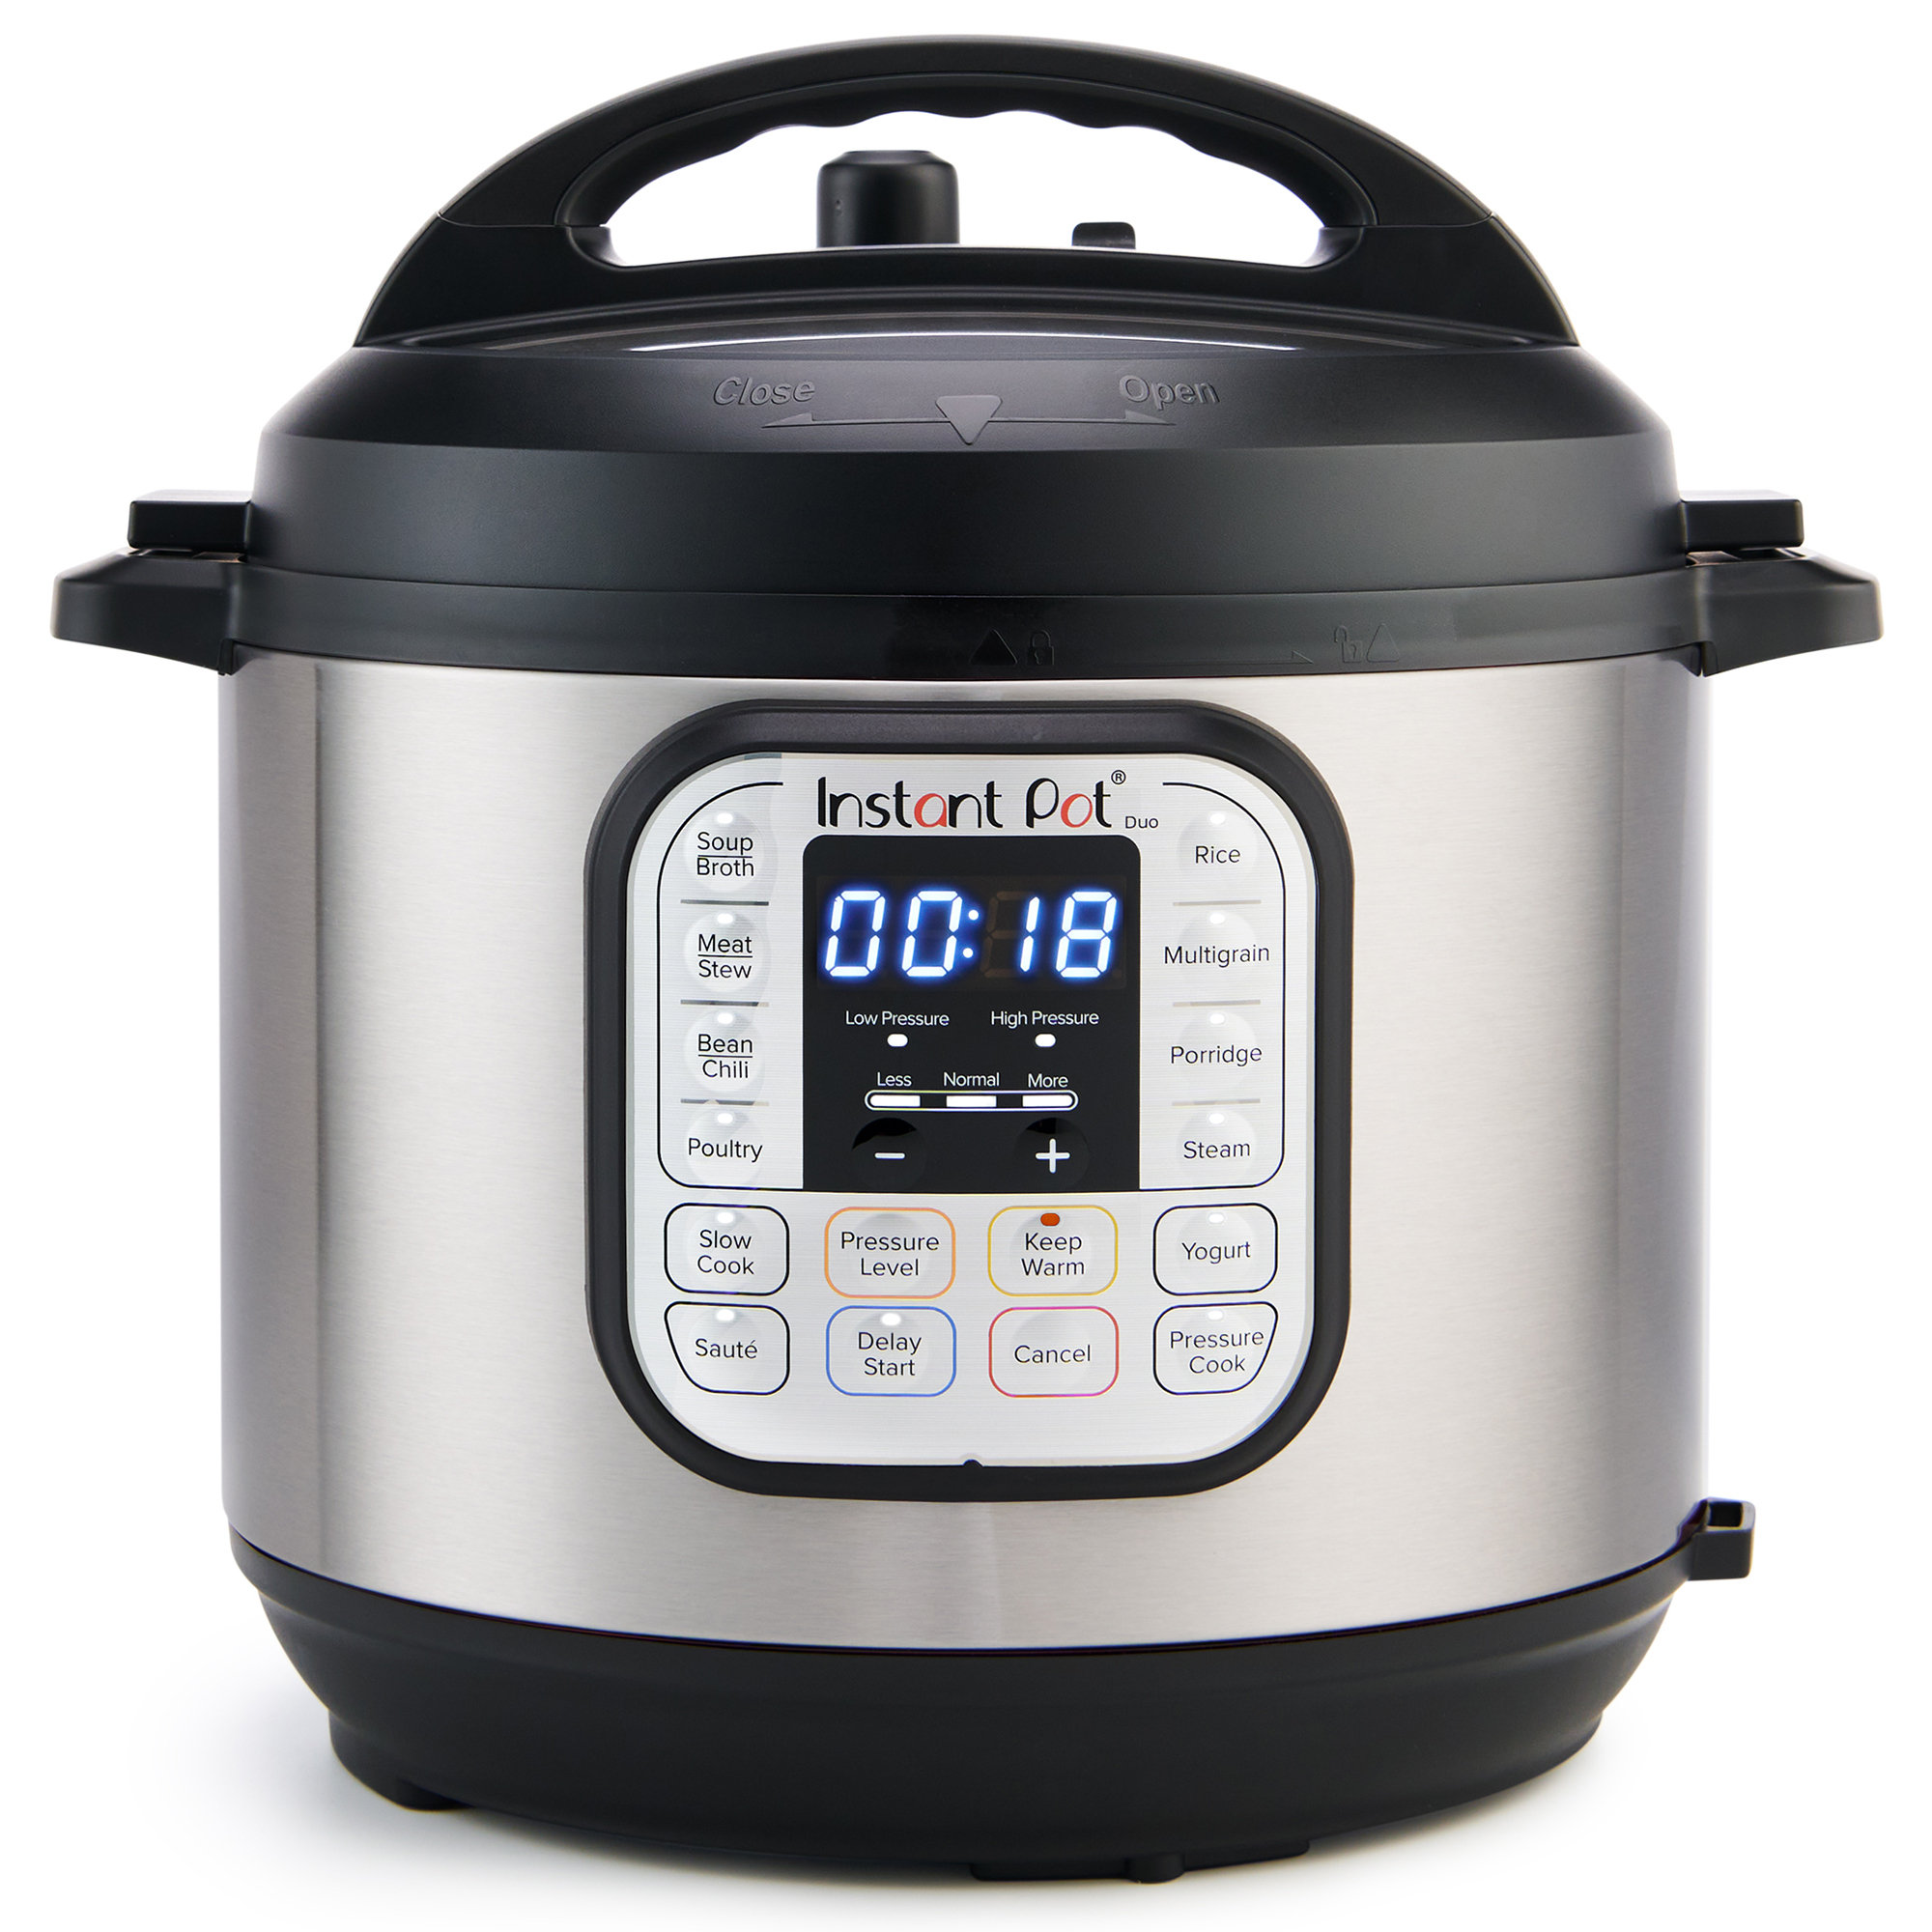 COMFEE' Pressure Cooker 6 Quart with 12 Presets, Multi-Functional